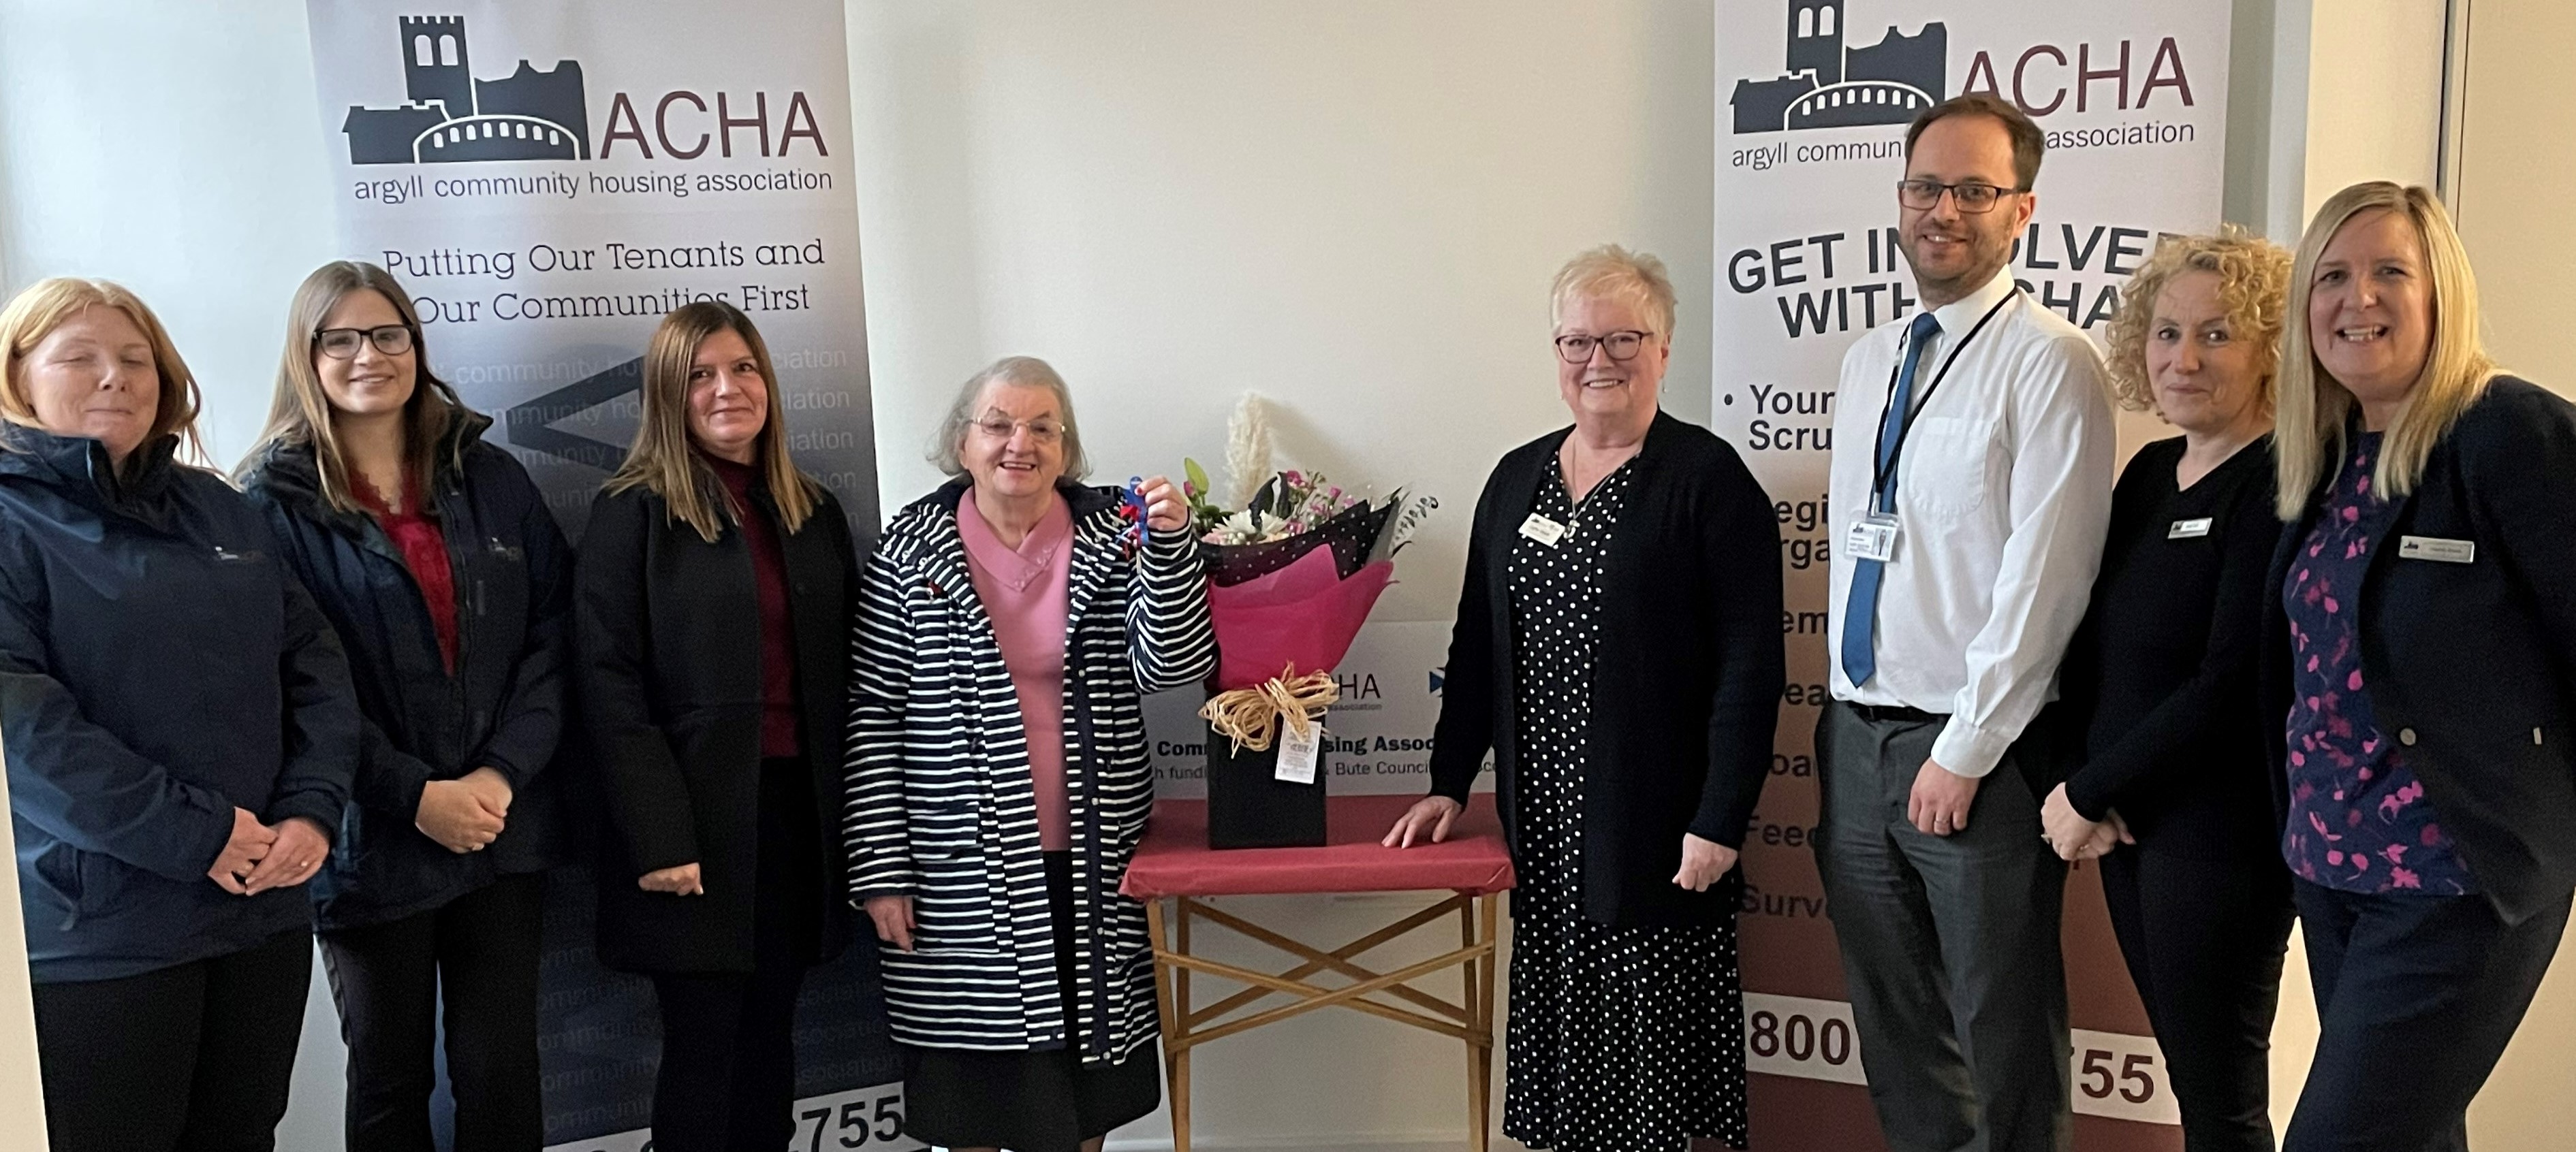 Argyll Community Housing Association completes dementia-friendly homes in Campbeltown